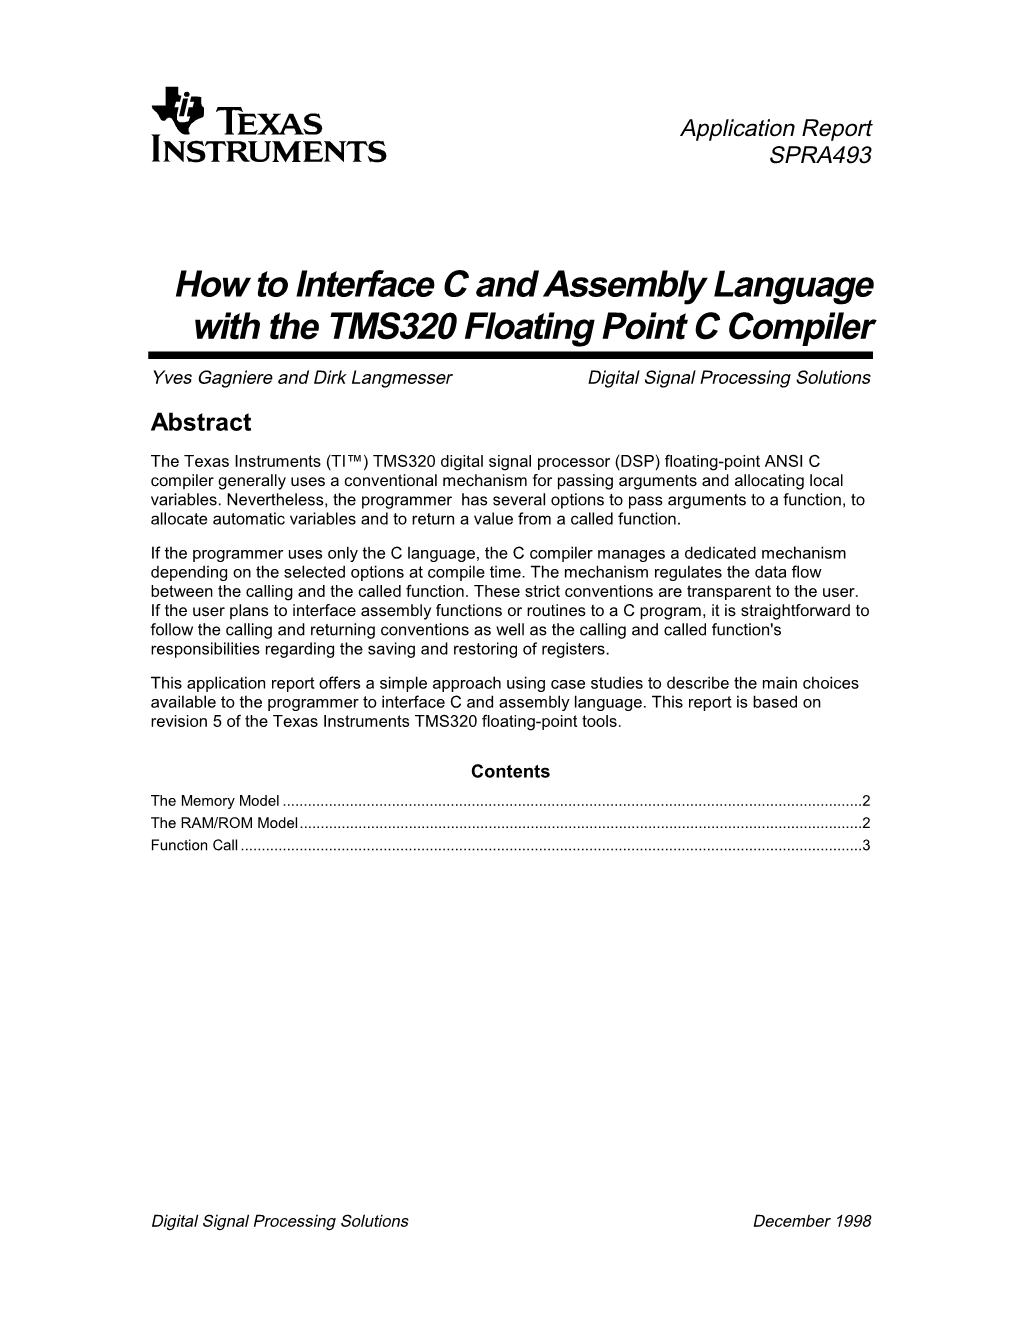 How to Interface C and Assembly Language with the TMS320 Floating Point C Compiler